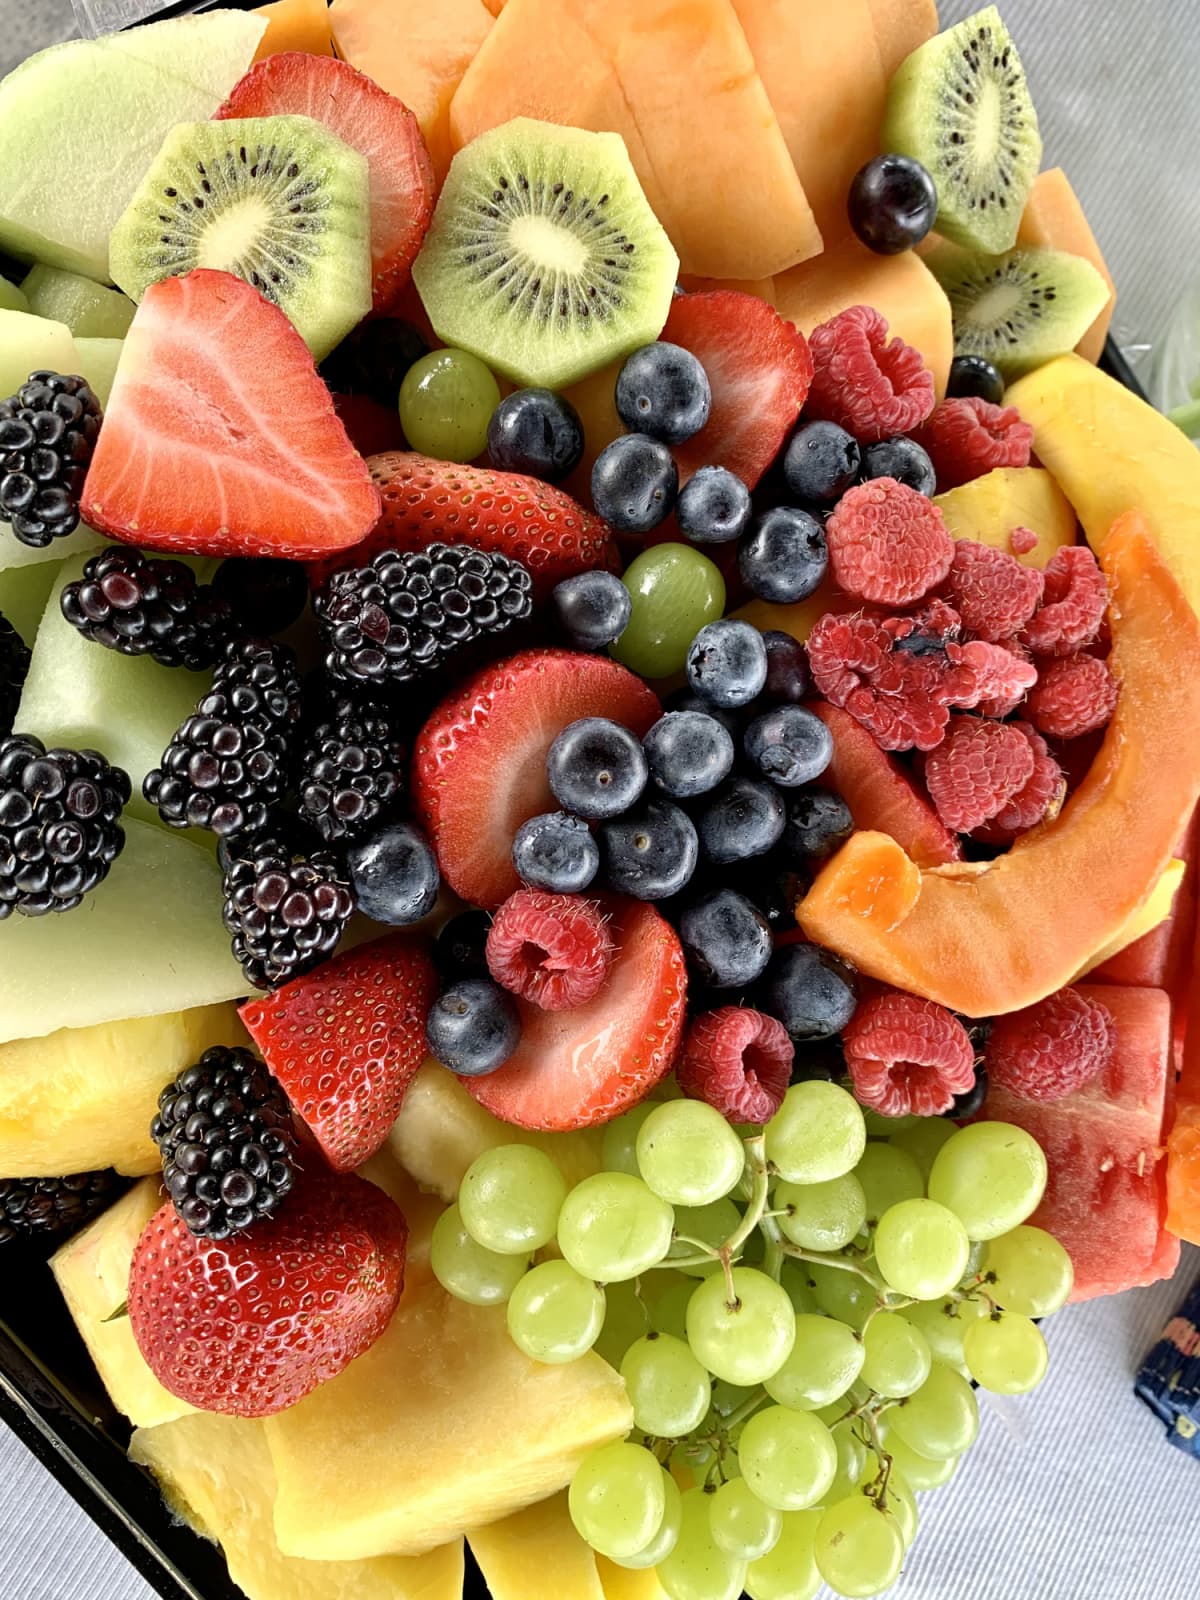 A close up photograph of a beautiful display of fruit salad. Grapes, berries, melon, pineapple & kiwi fill the frame.